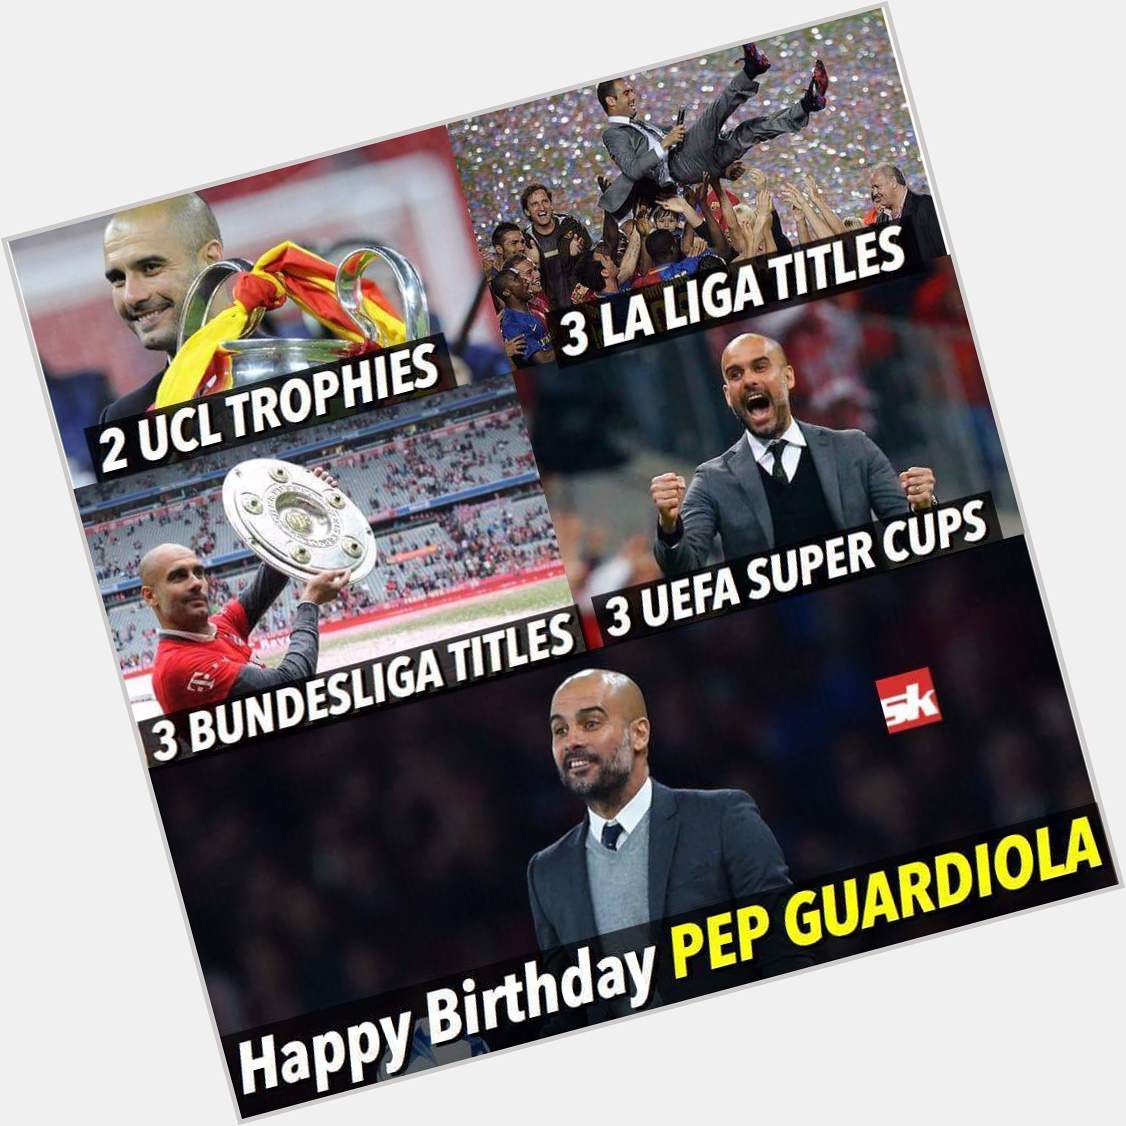 Wishing a very happy 46th birthday to Manchester City manager, Pep Guardiola!  